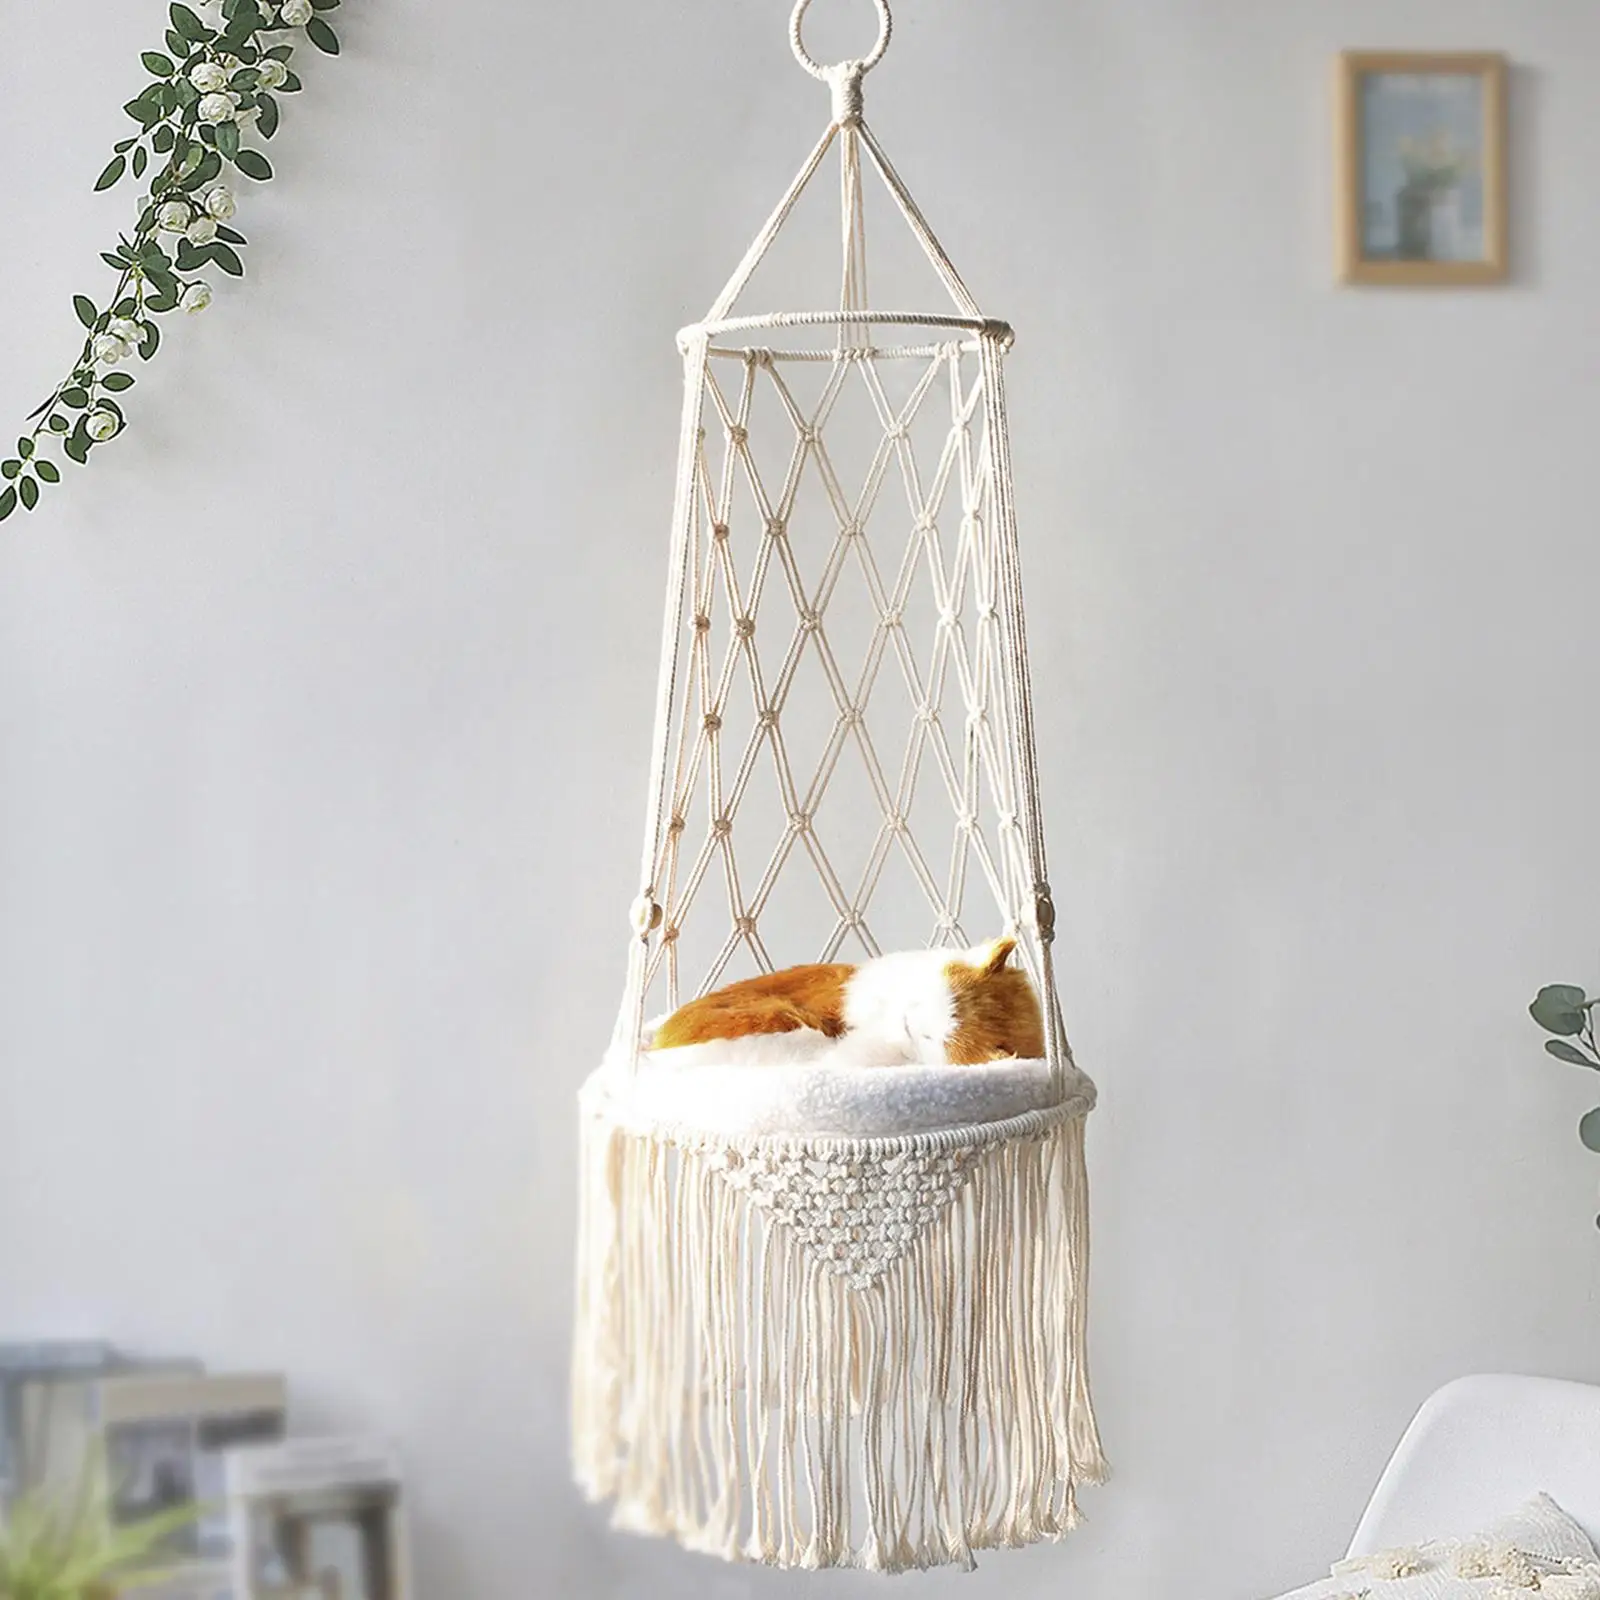 Macrame Cat Hammock Decoration Boho Tapestry Cotton Rope Gifts Tassel Hanging Cat Cage Nest House for Wall Indoor Outdoor Garden